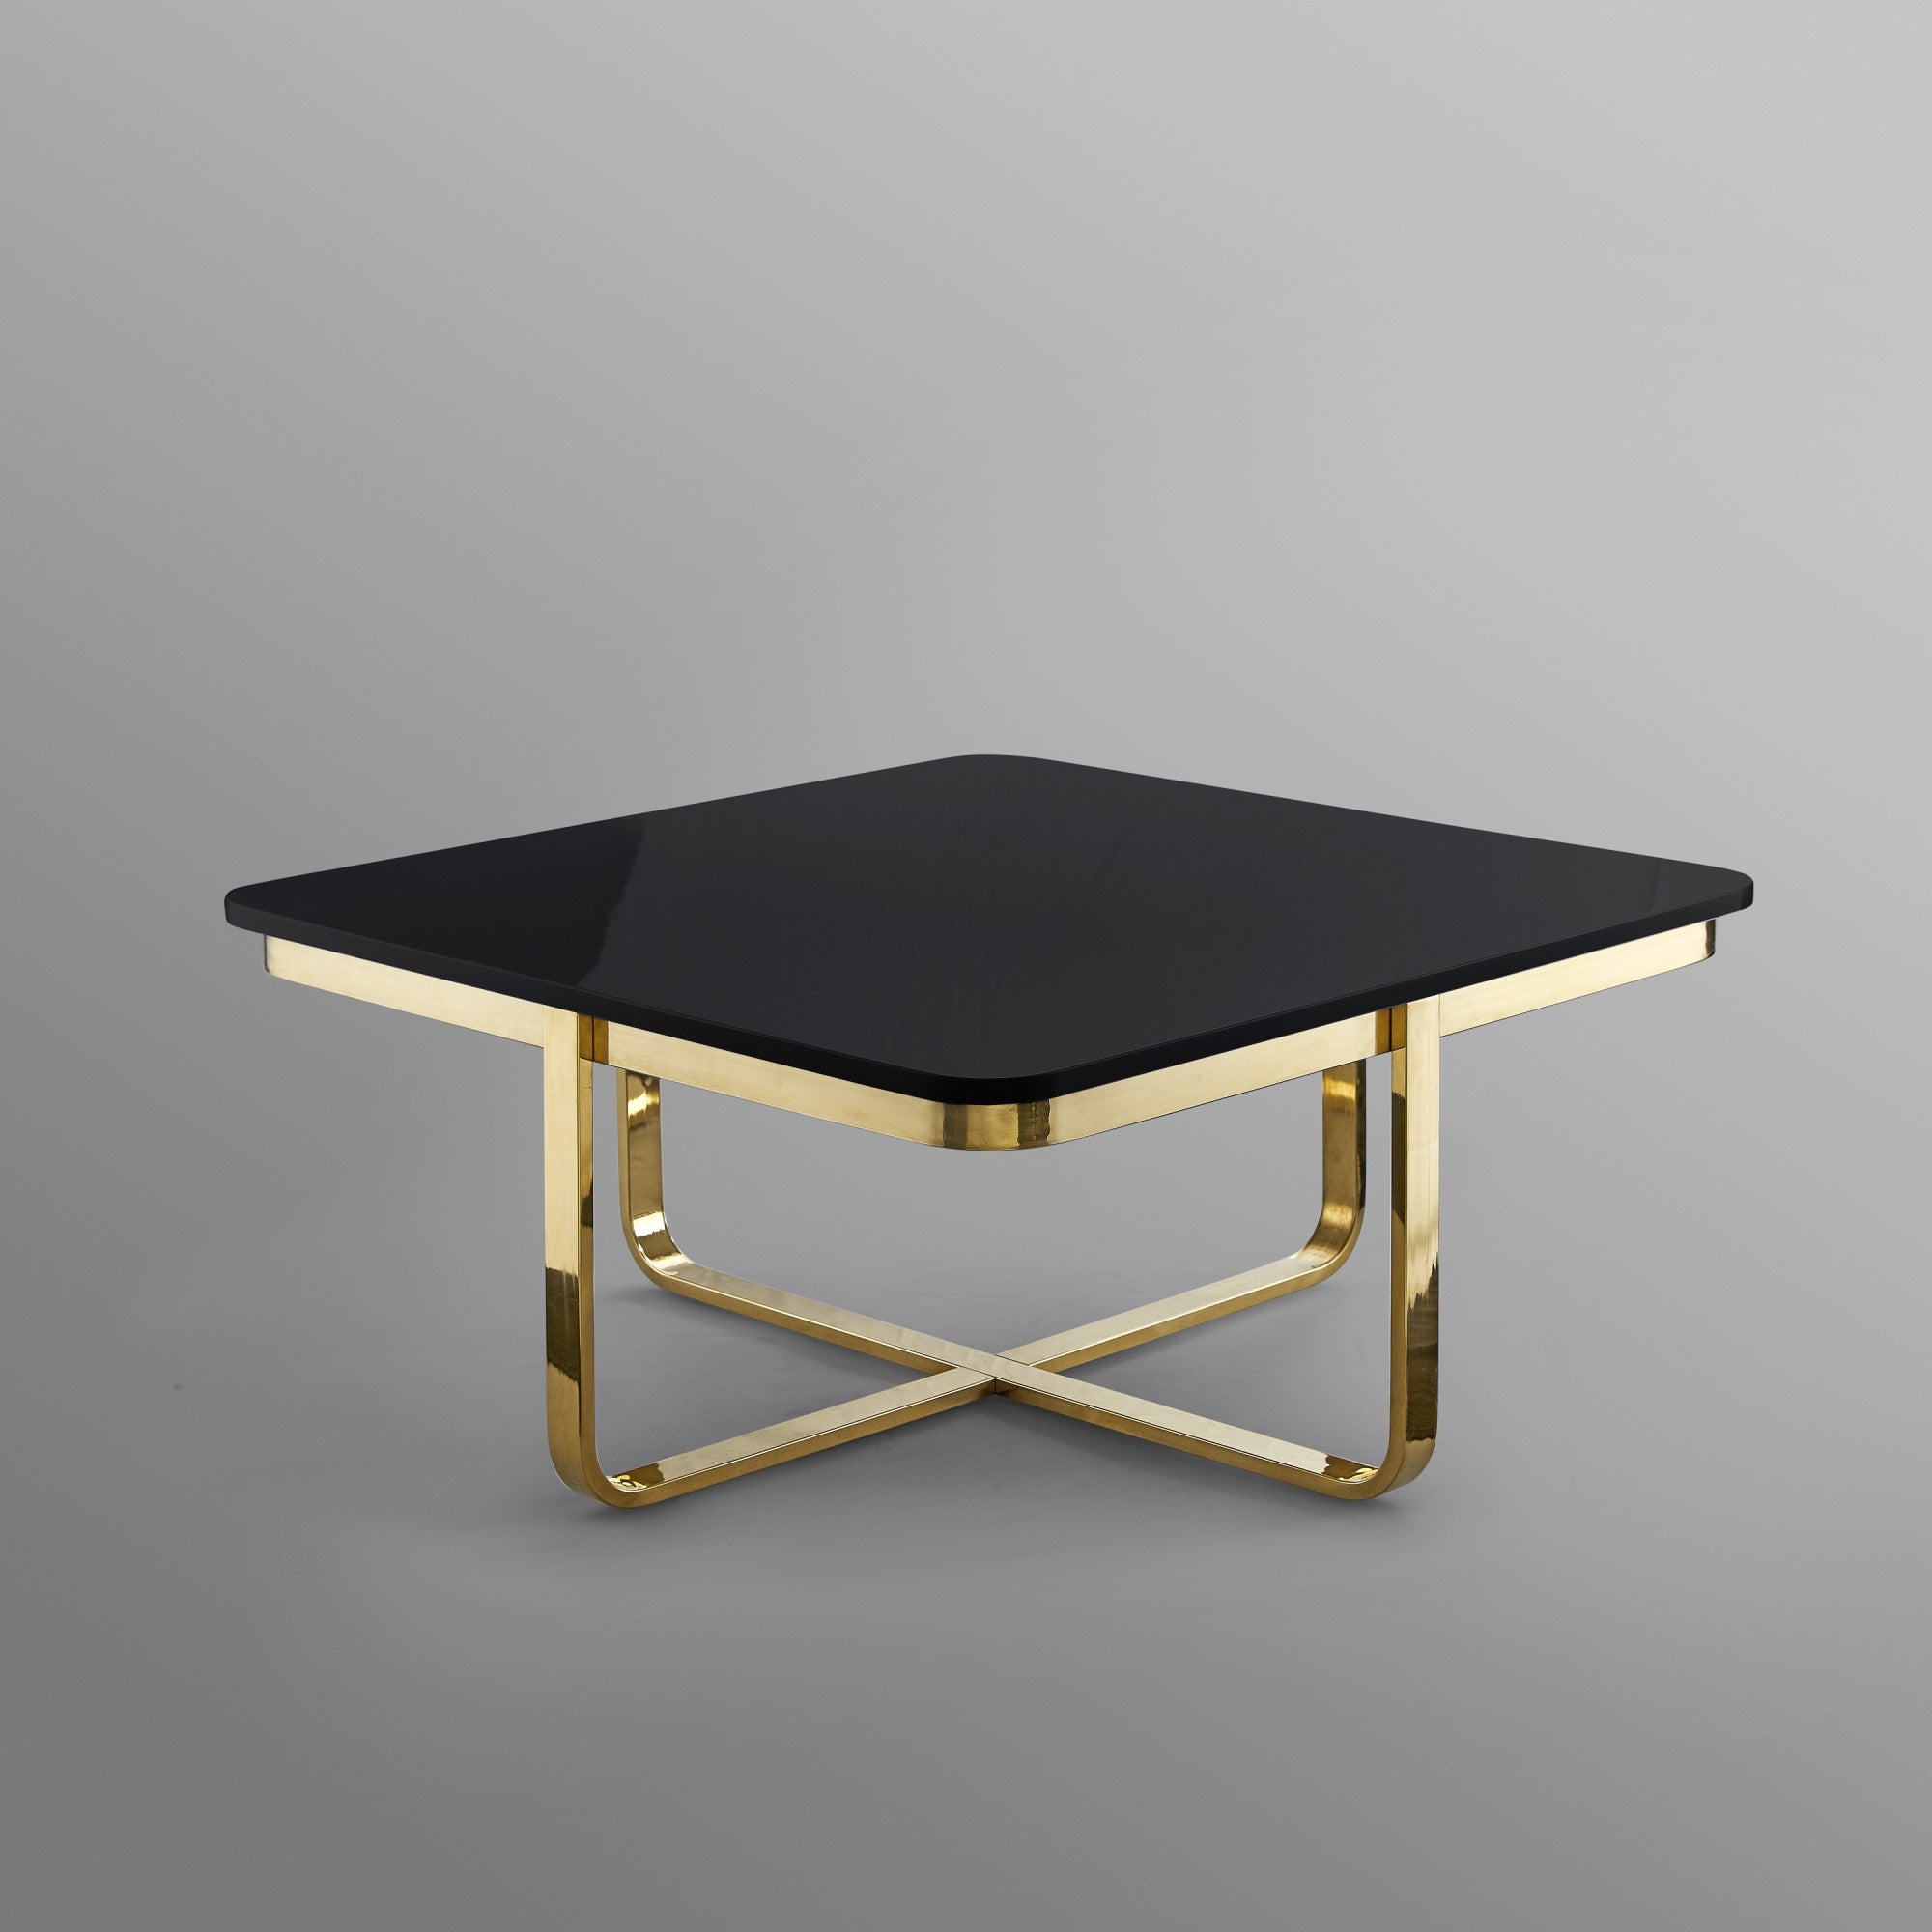 35" Black And Gold Stainless Steel Square Coffee Table